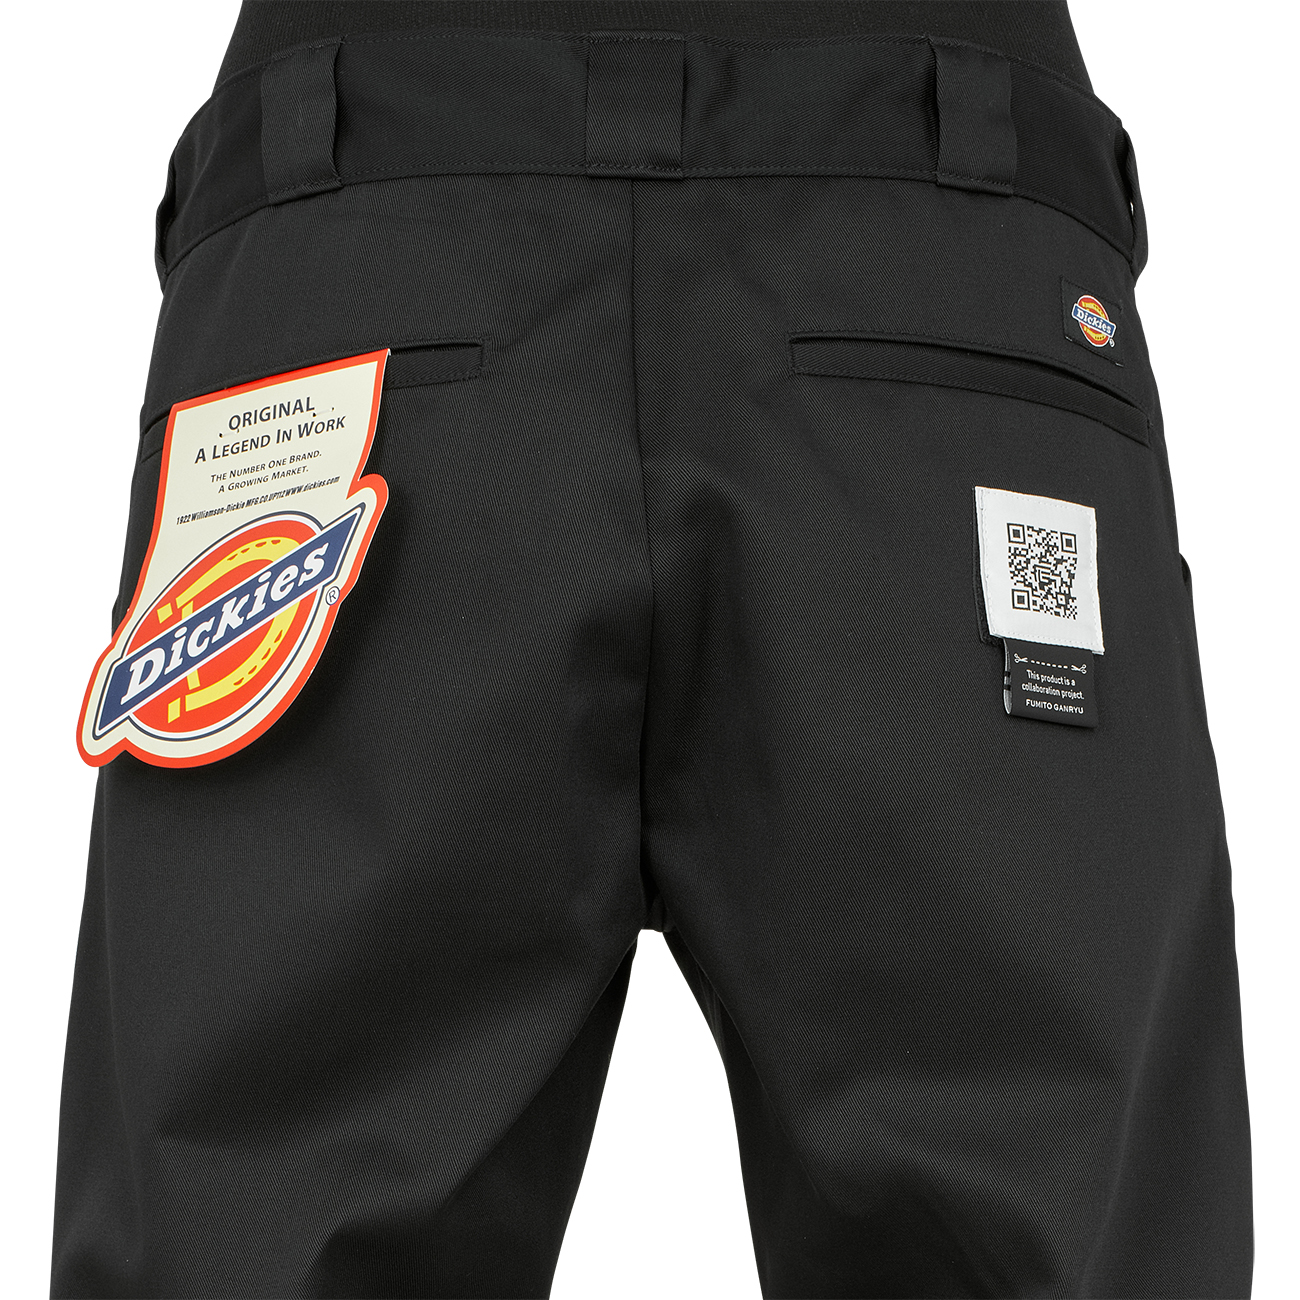 DICKIES COLLABORATION TAPERED PANTS BLACK